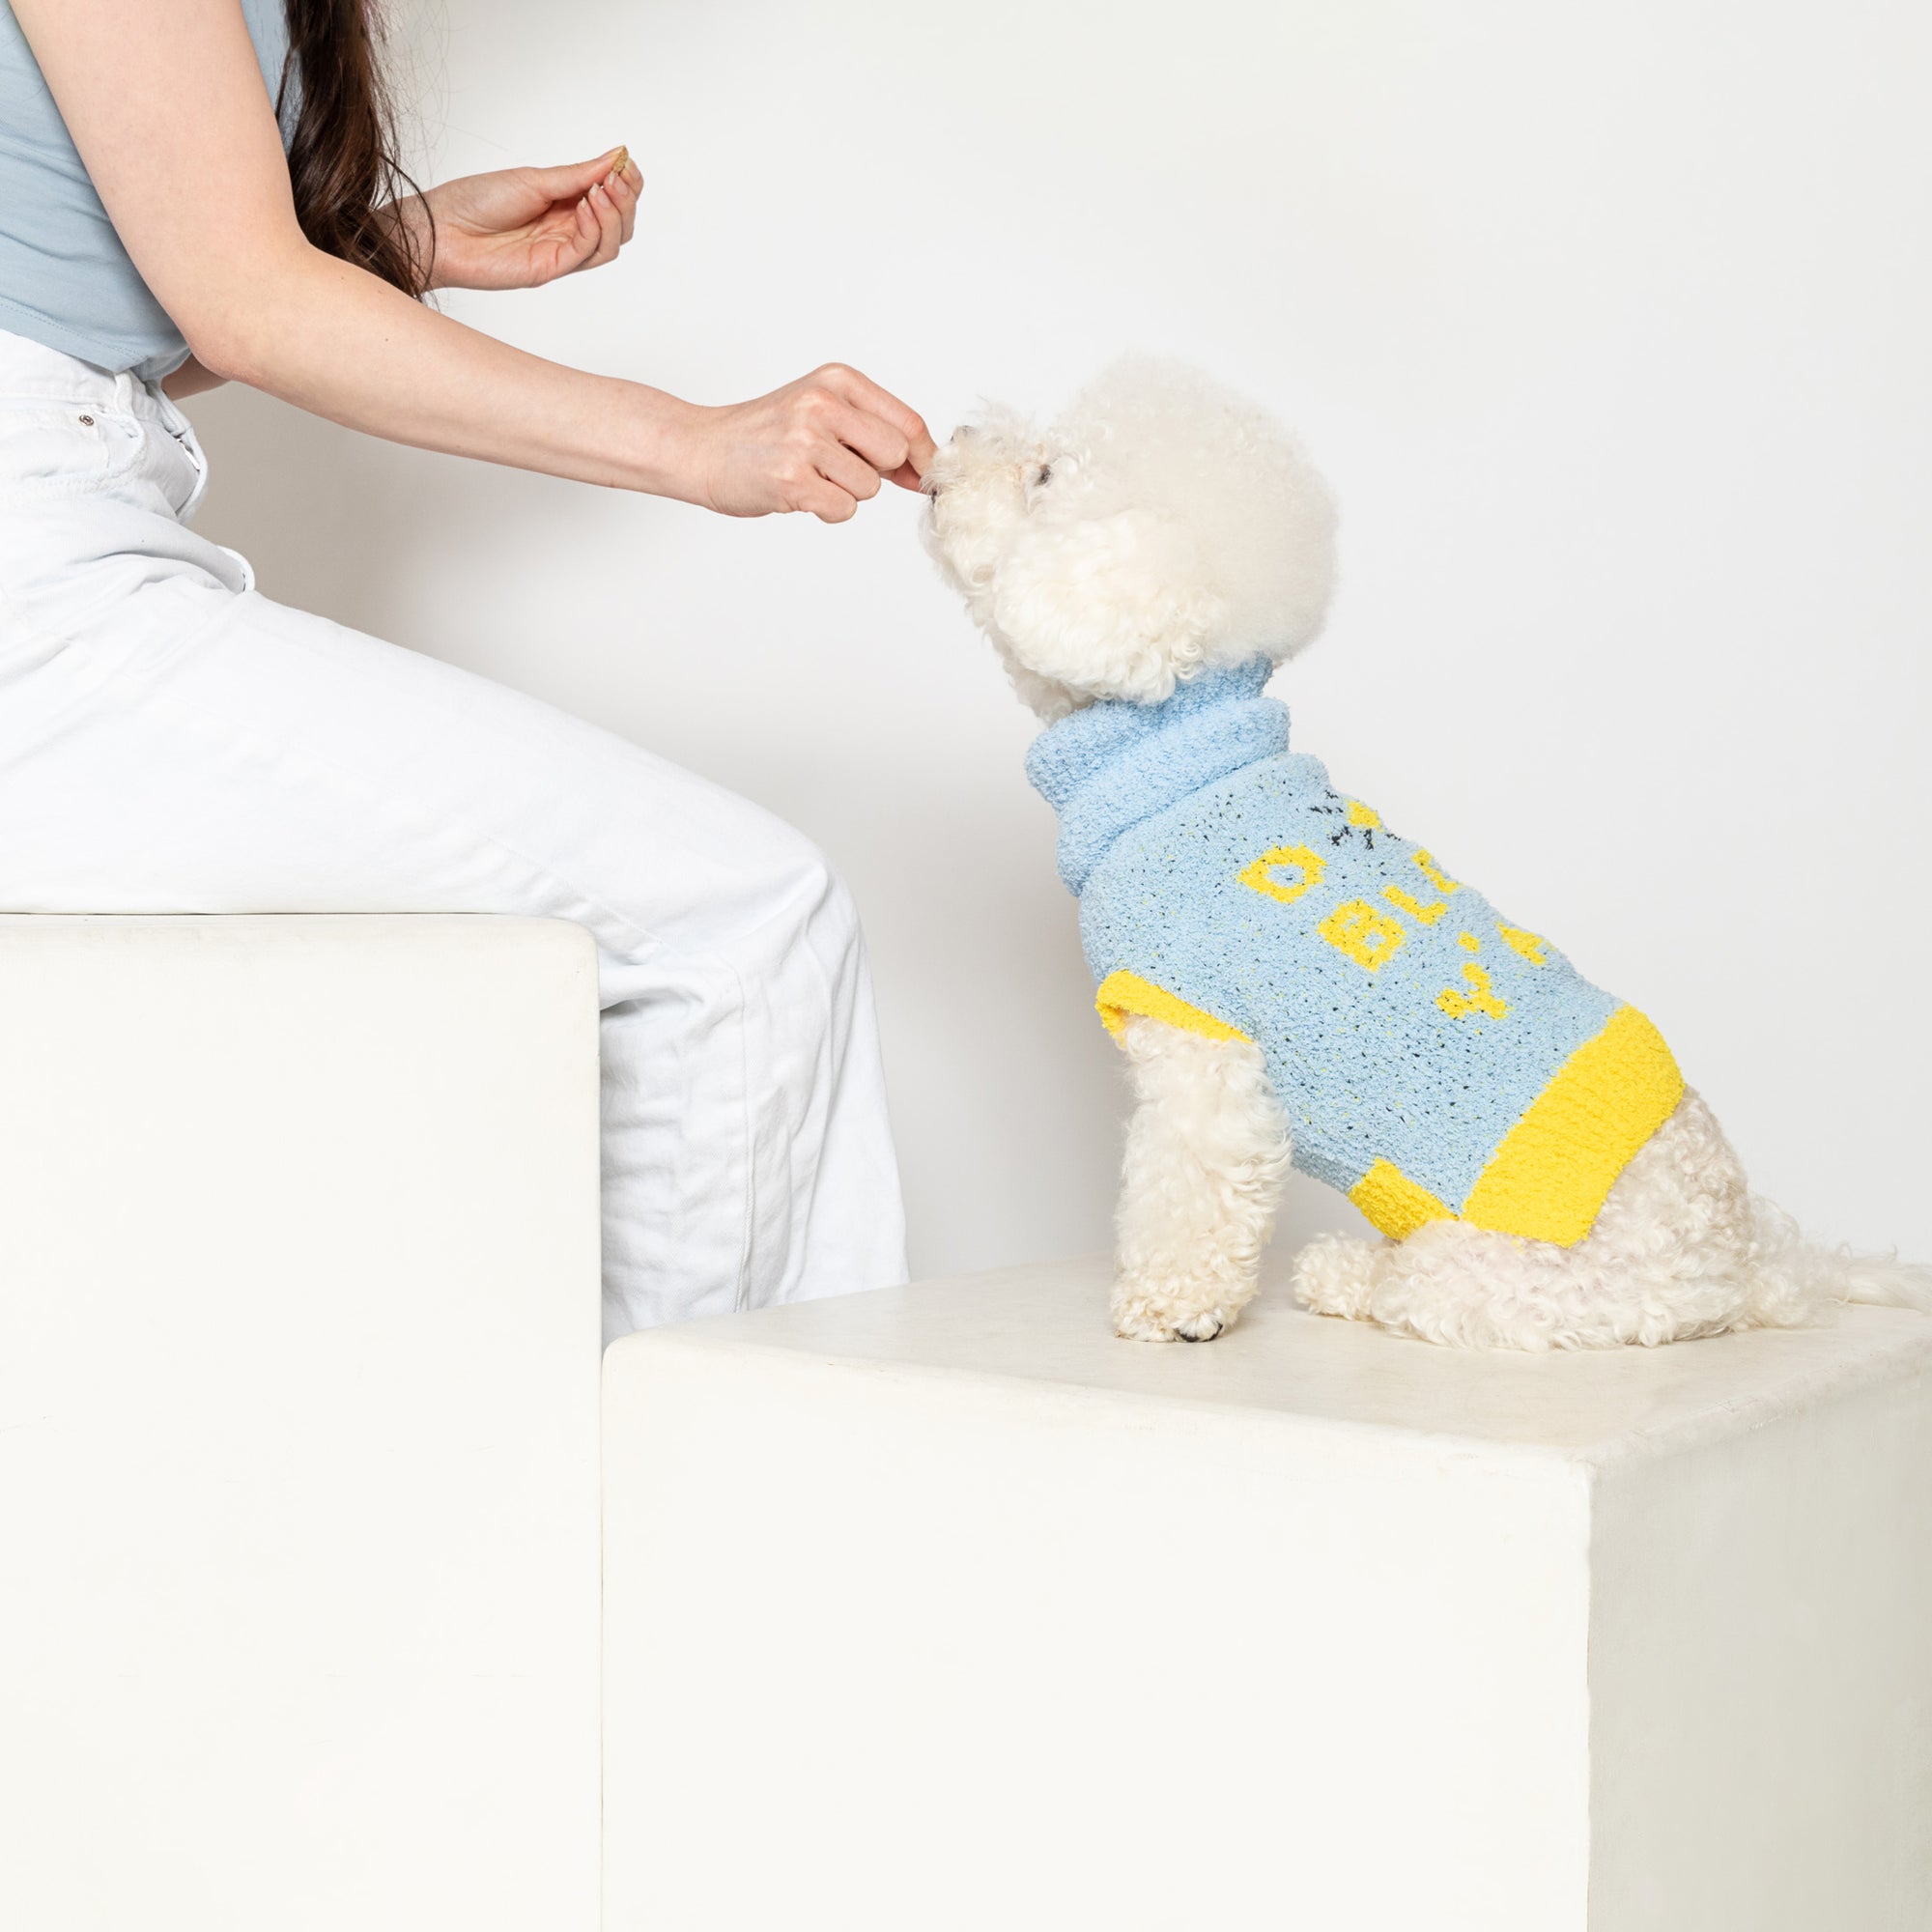  White bichon frise in a light blue and yellow "The Furryfolks" sweater sits on a pedestal, receiving a treat from a person's hand, neutral background.